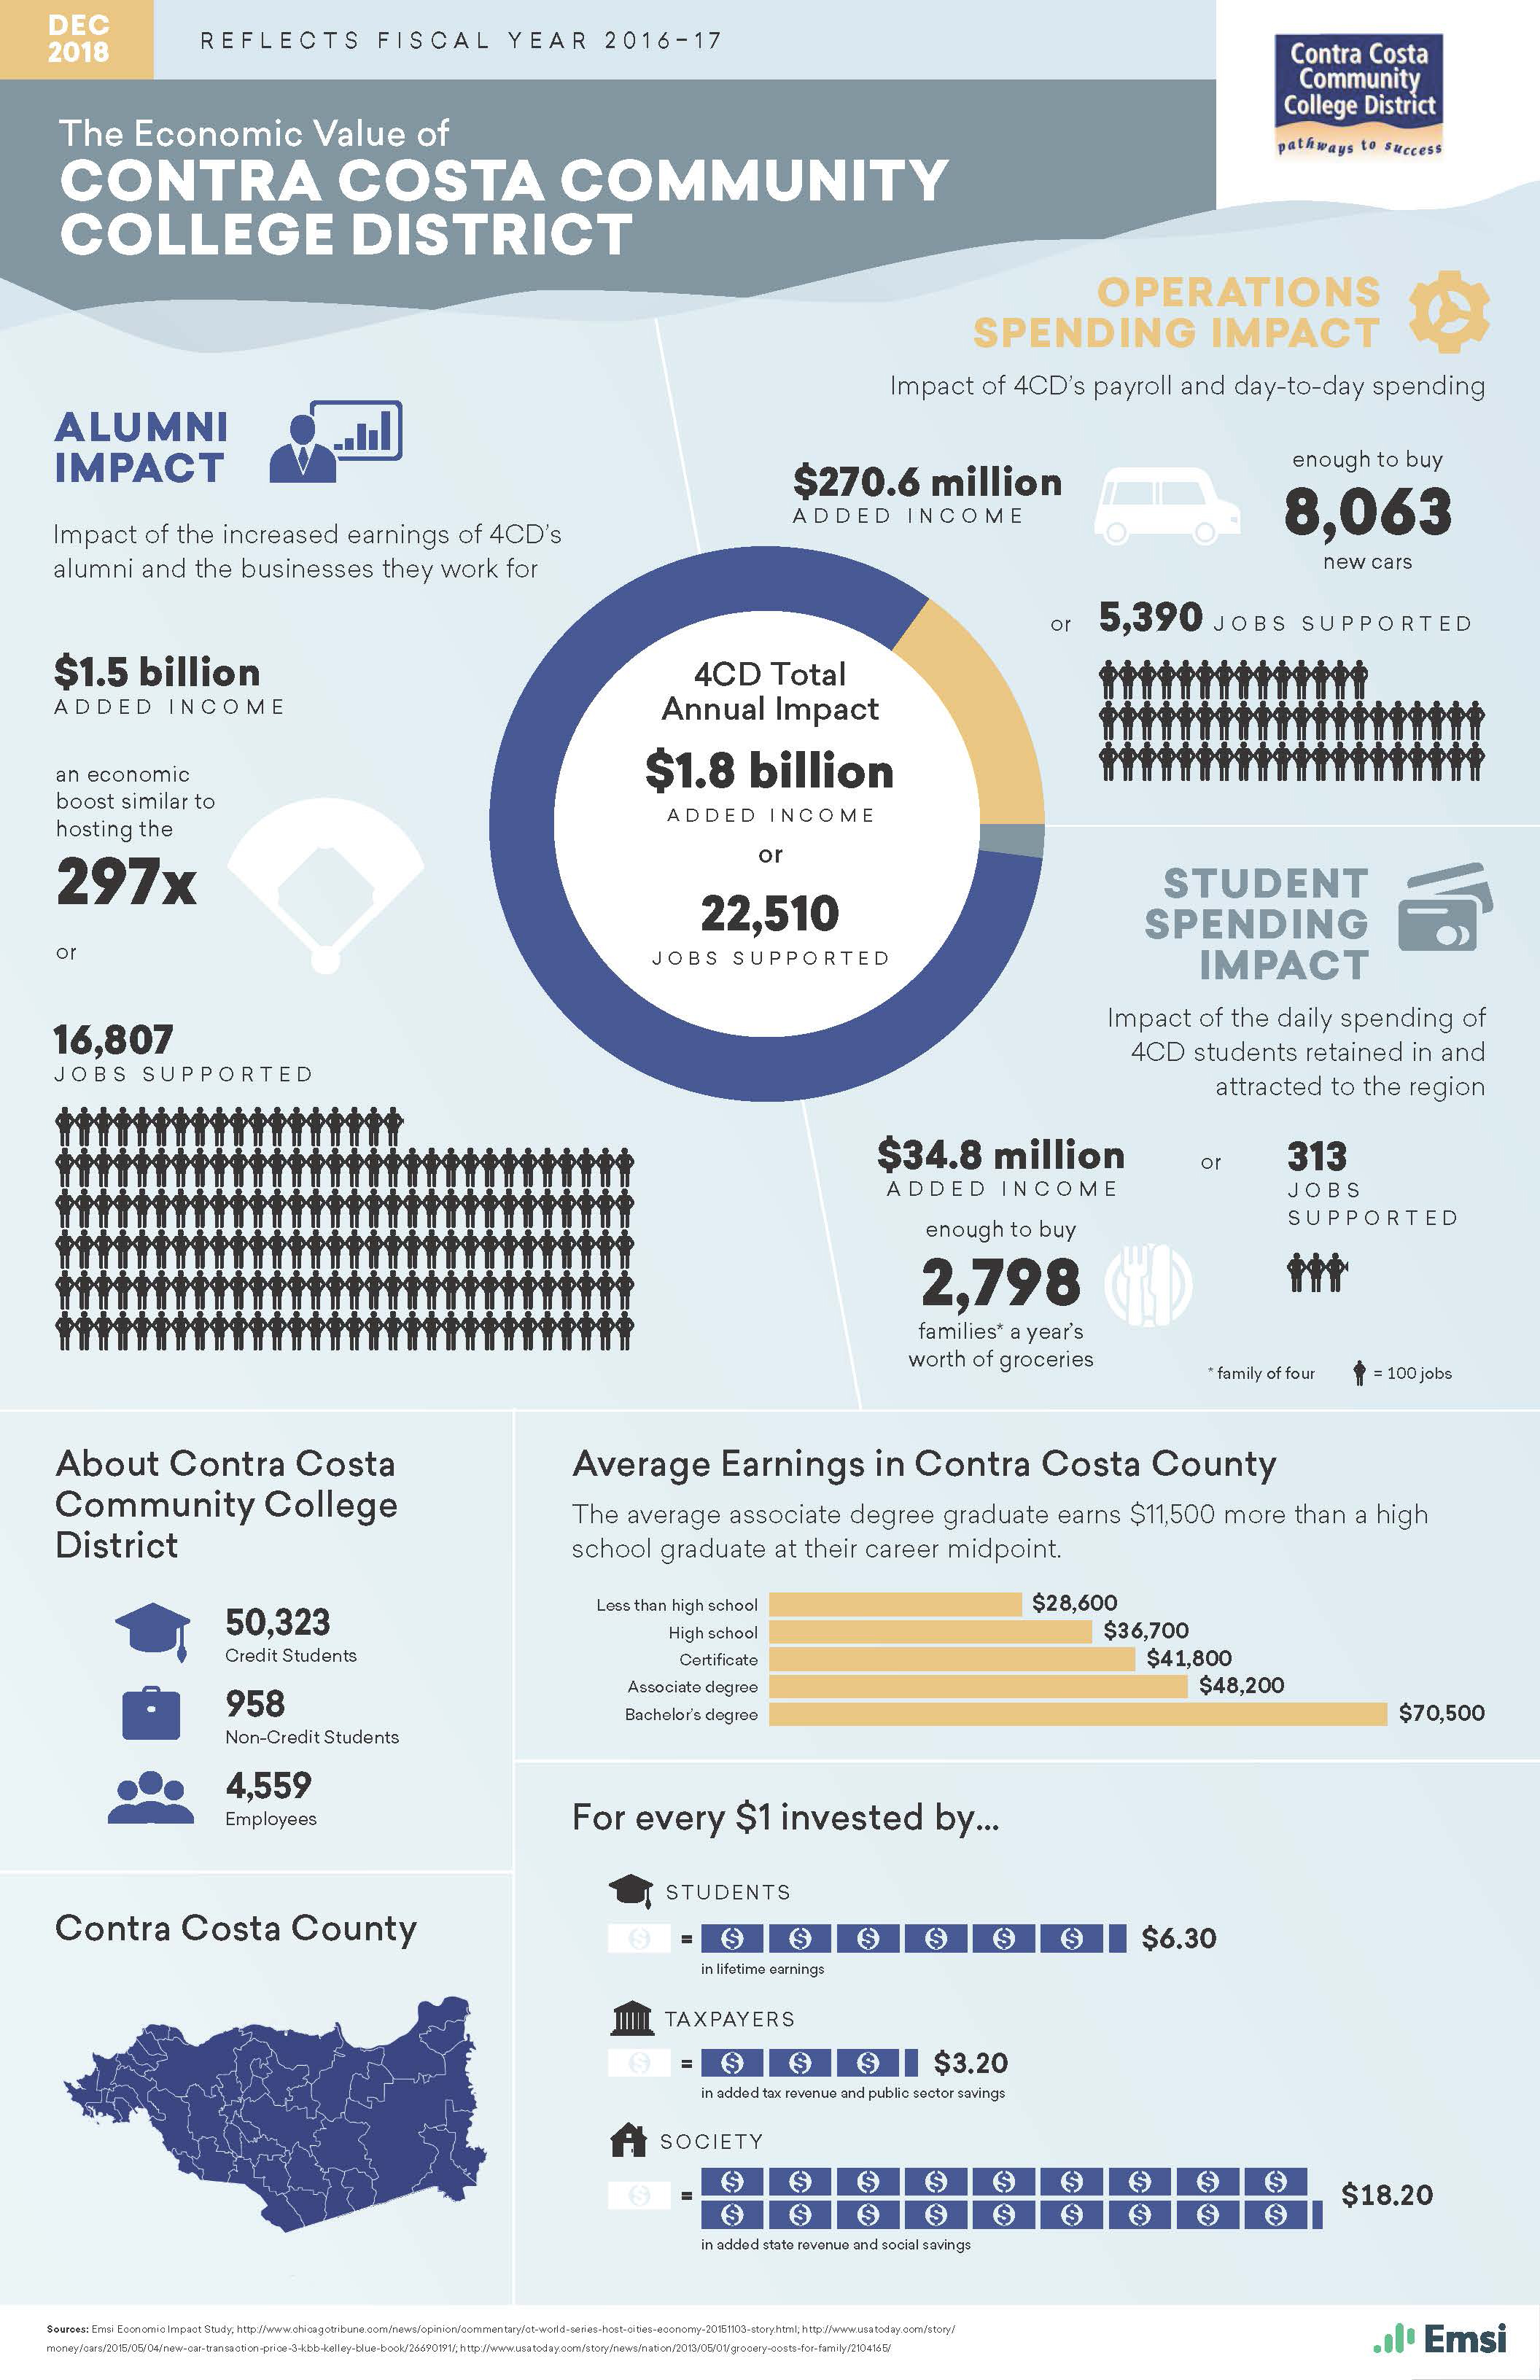 The Economic Value of Contra Costa Community College District Fiscal Year 2016-2017